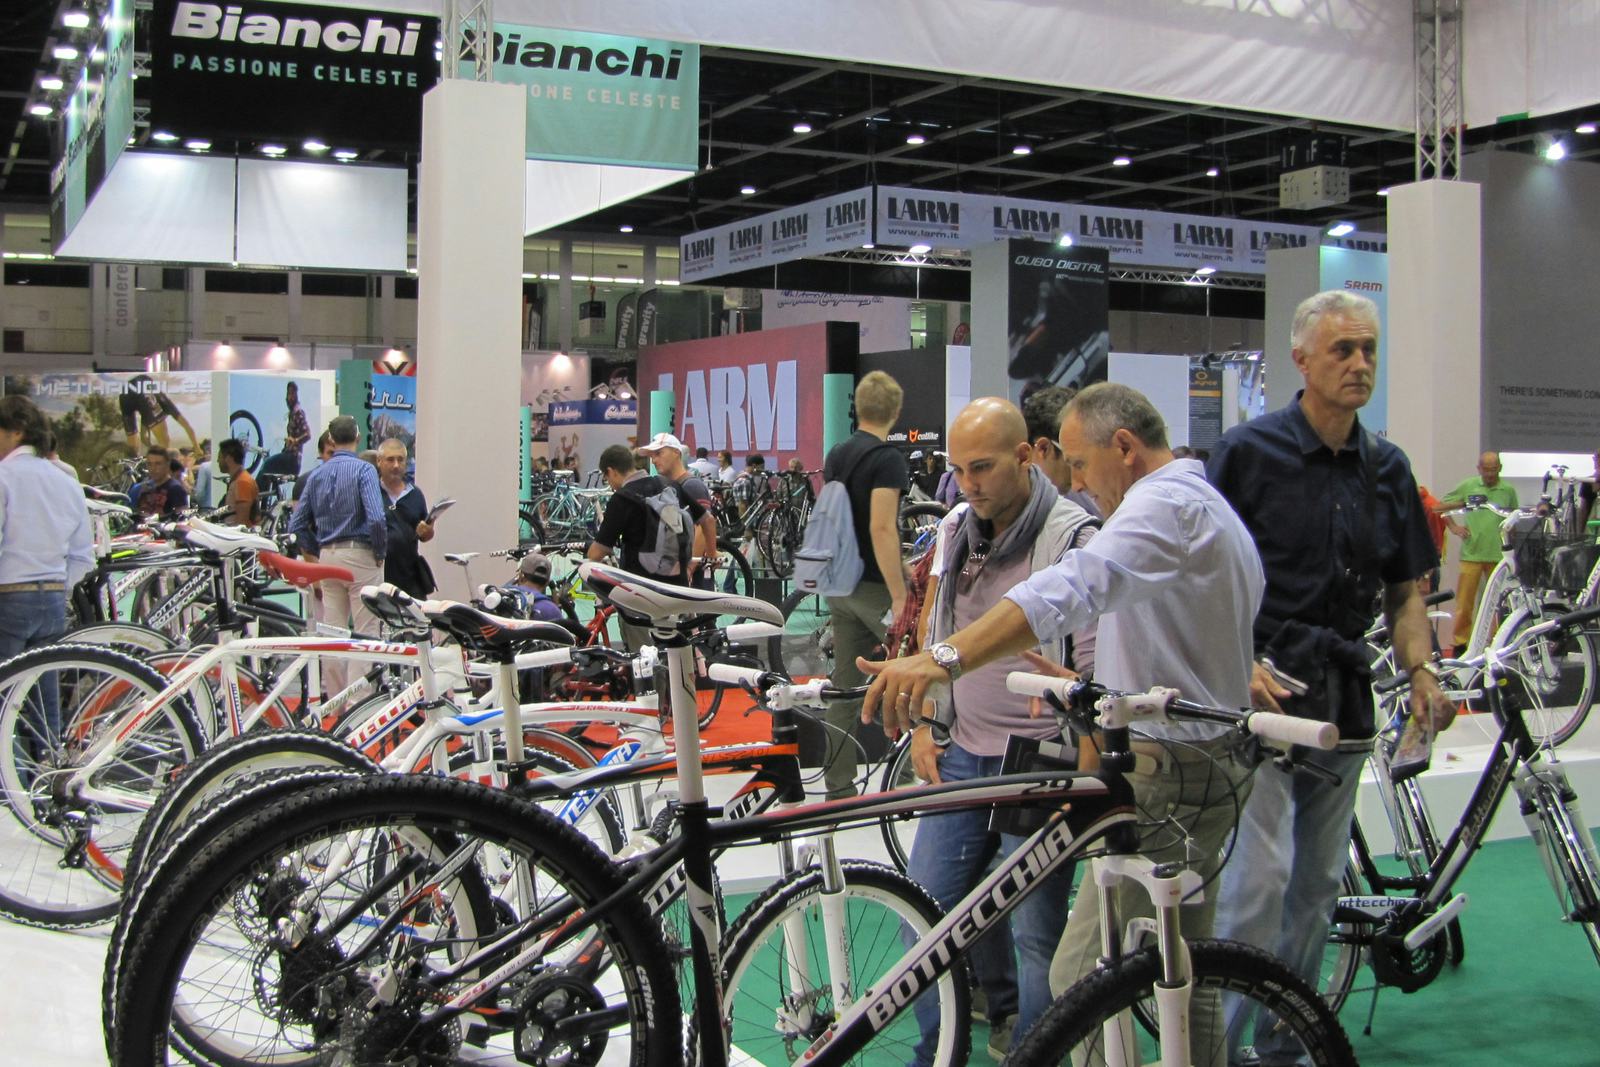 Expobici has developed quickly as the place to be for the Italian bicycle industry.